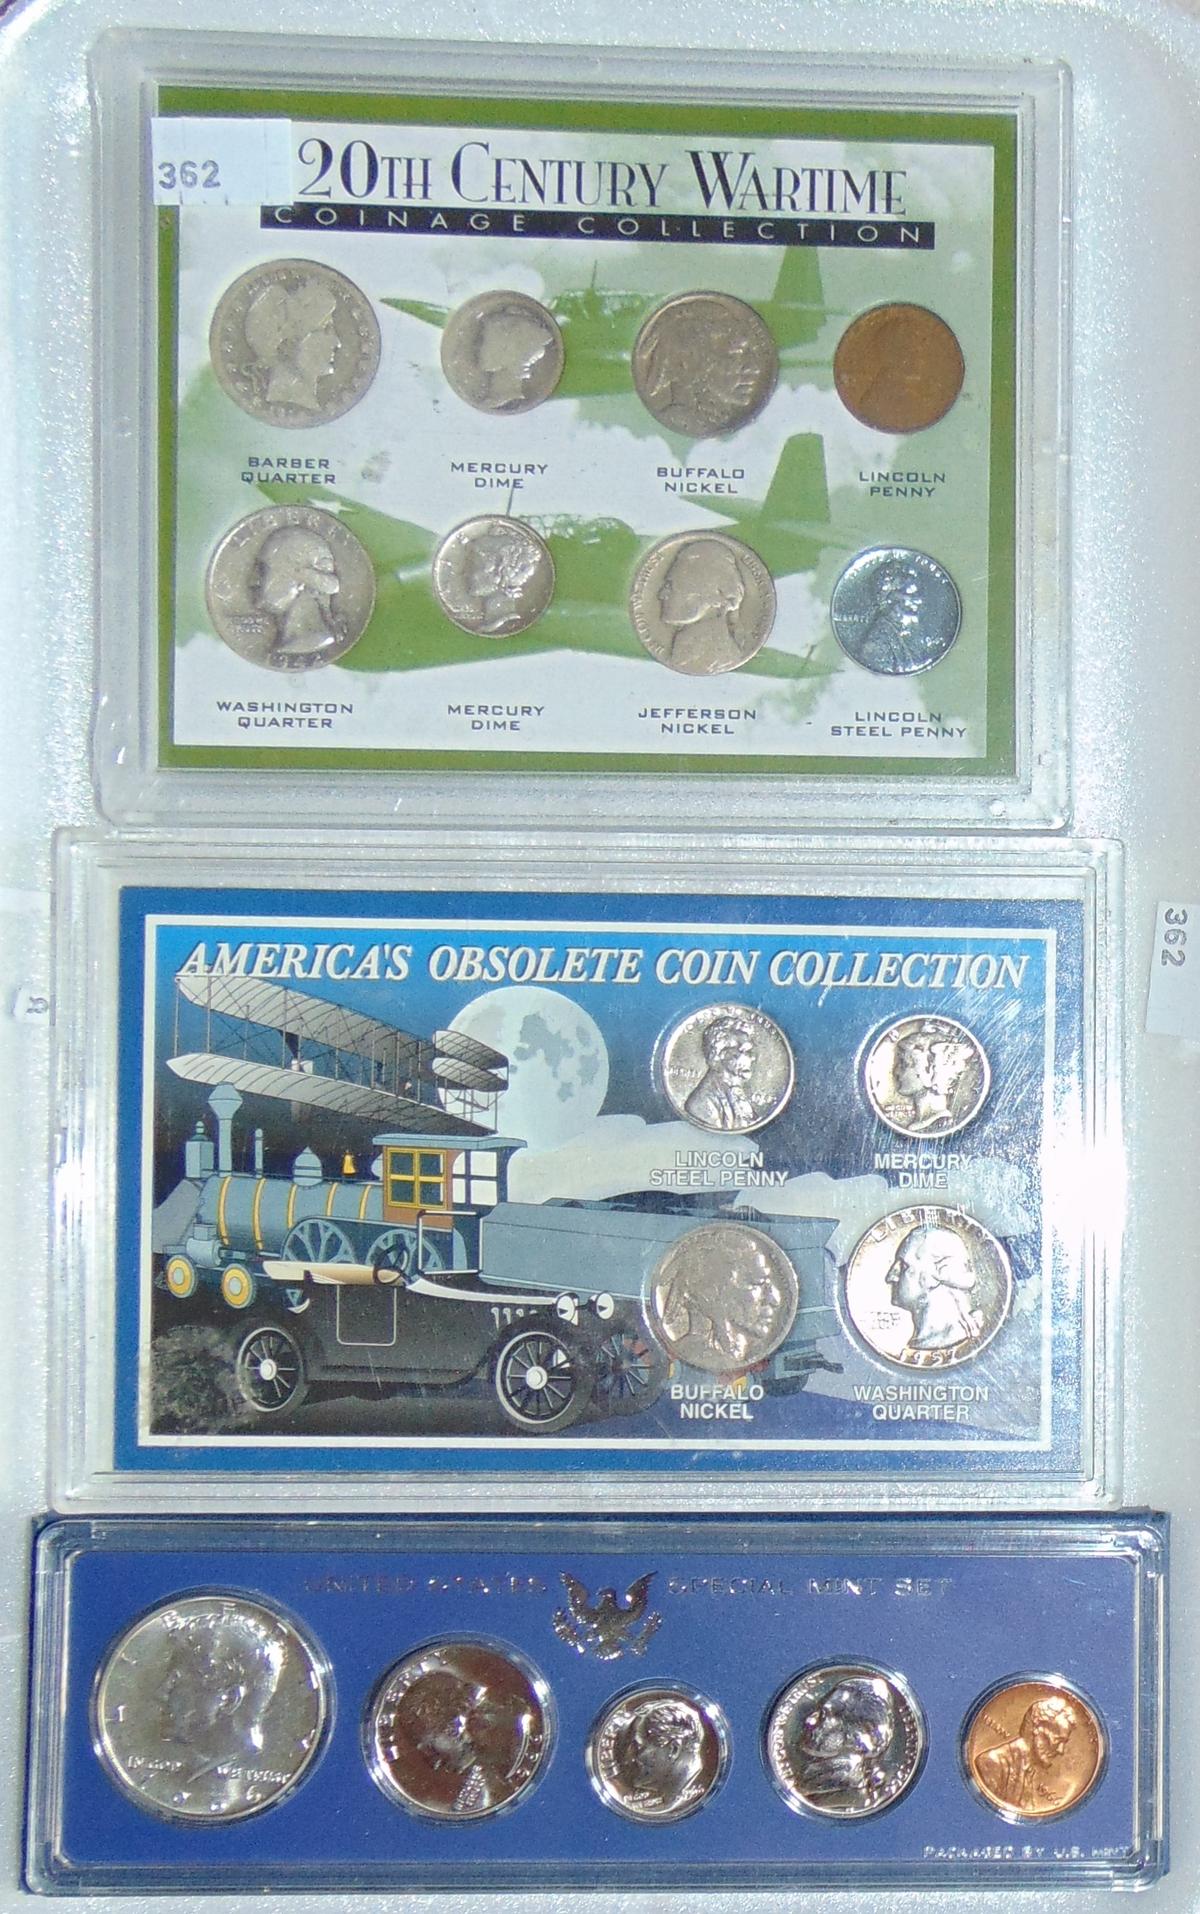 Variety: $1.05 in 90% U.S. Silver in Sets with